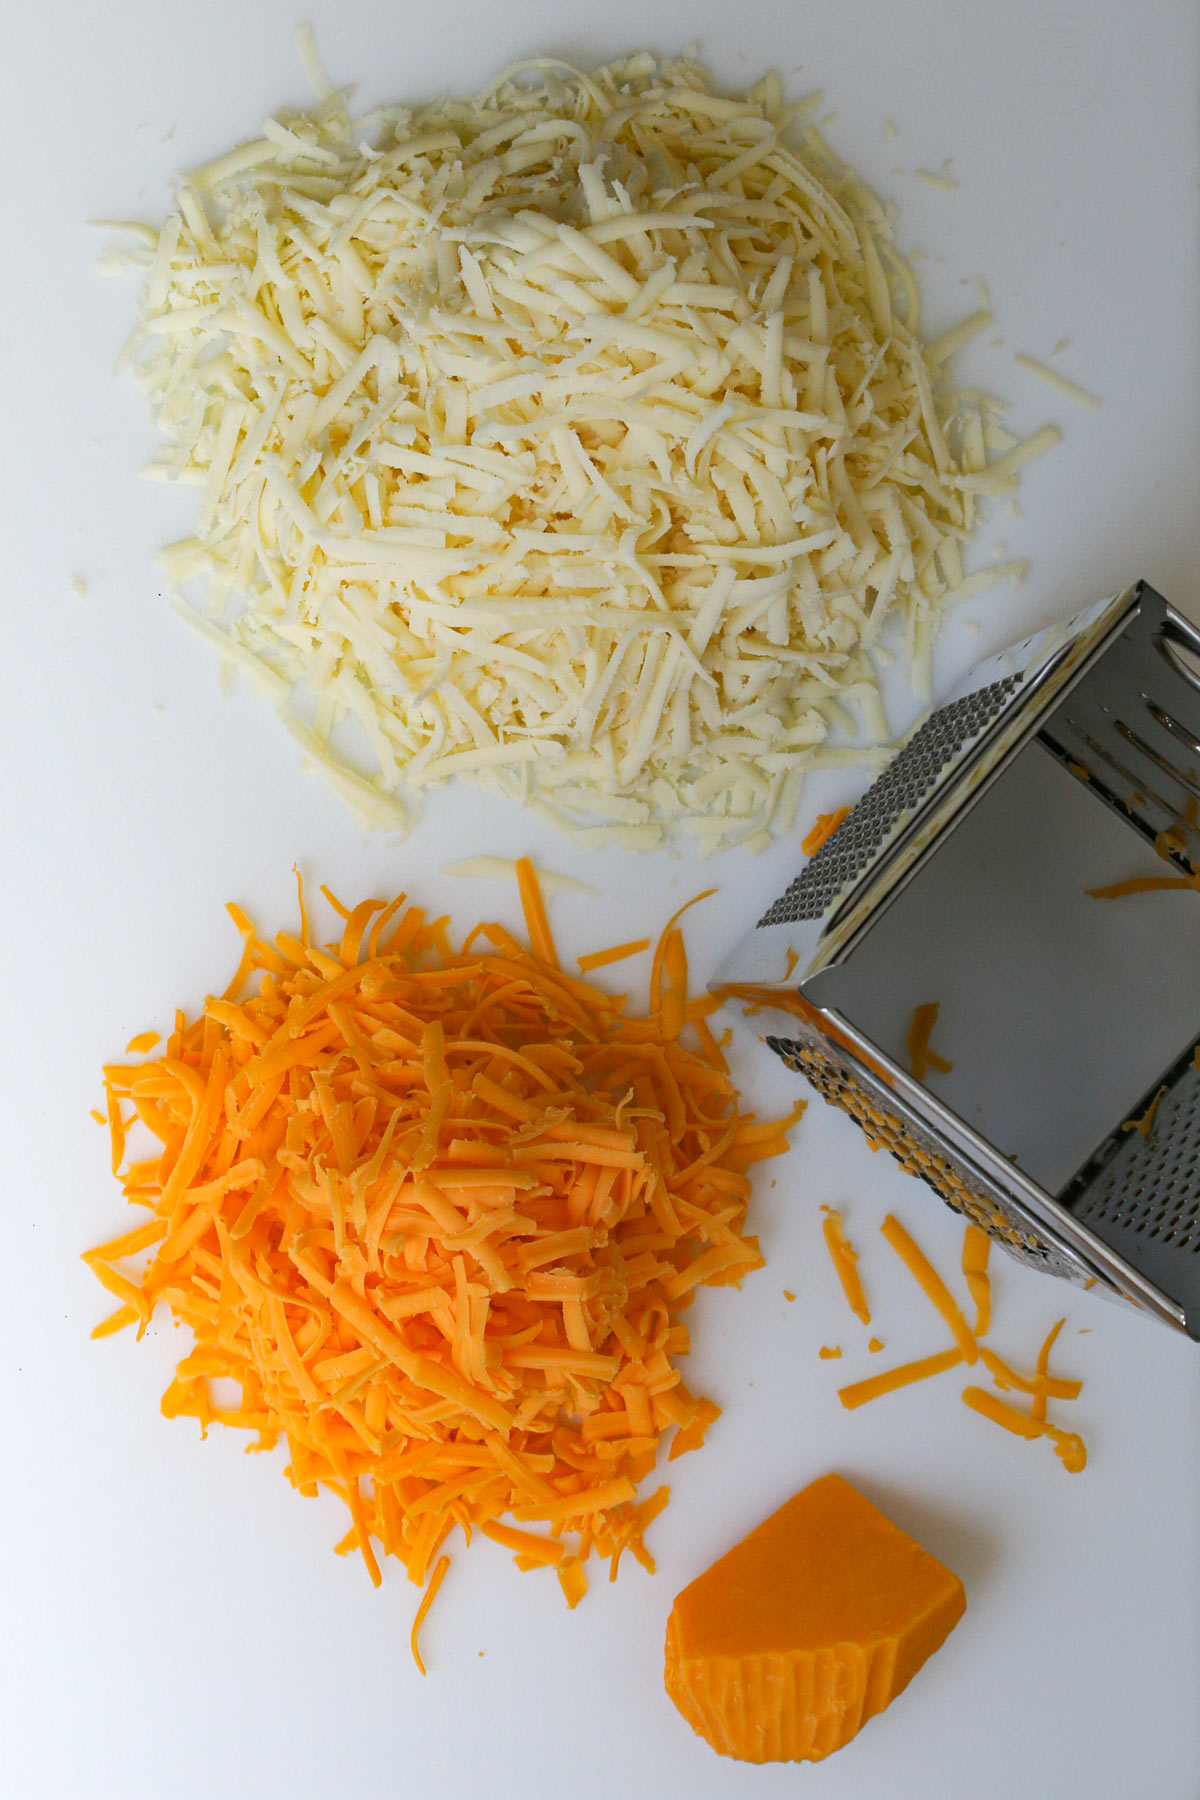 piles of jack and cheddar cheese on white board next to box grater with a small hunk of cheddar nearby.